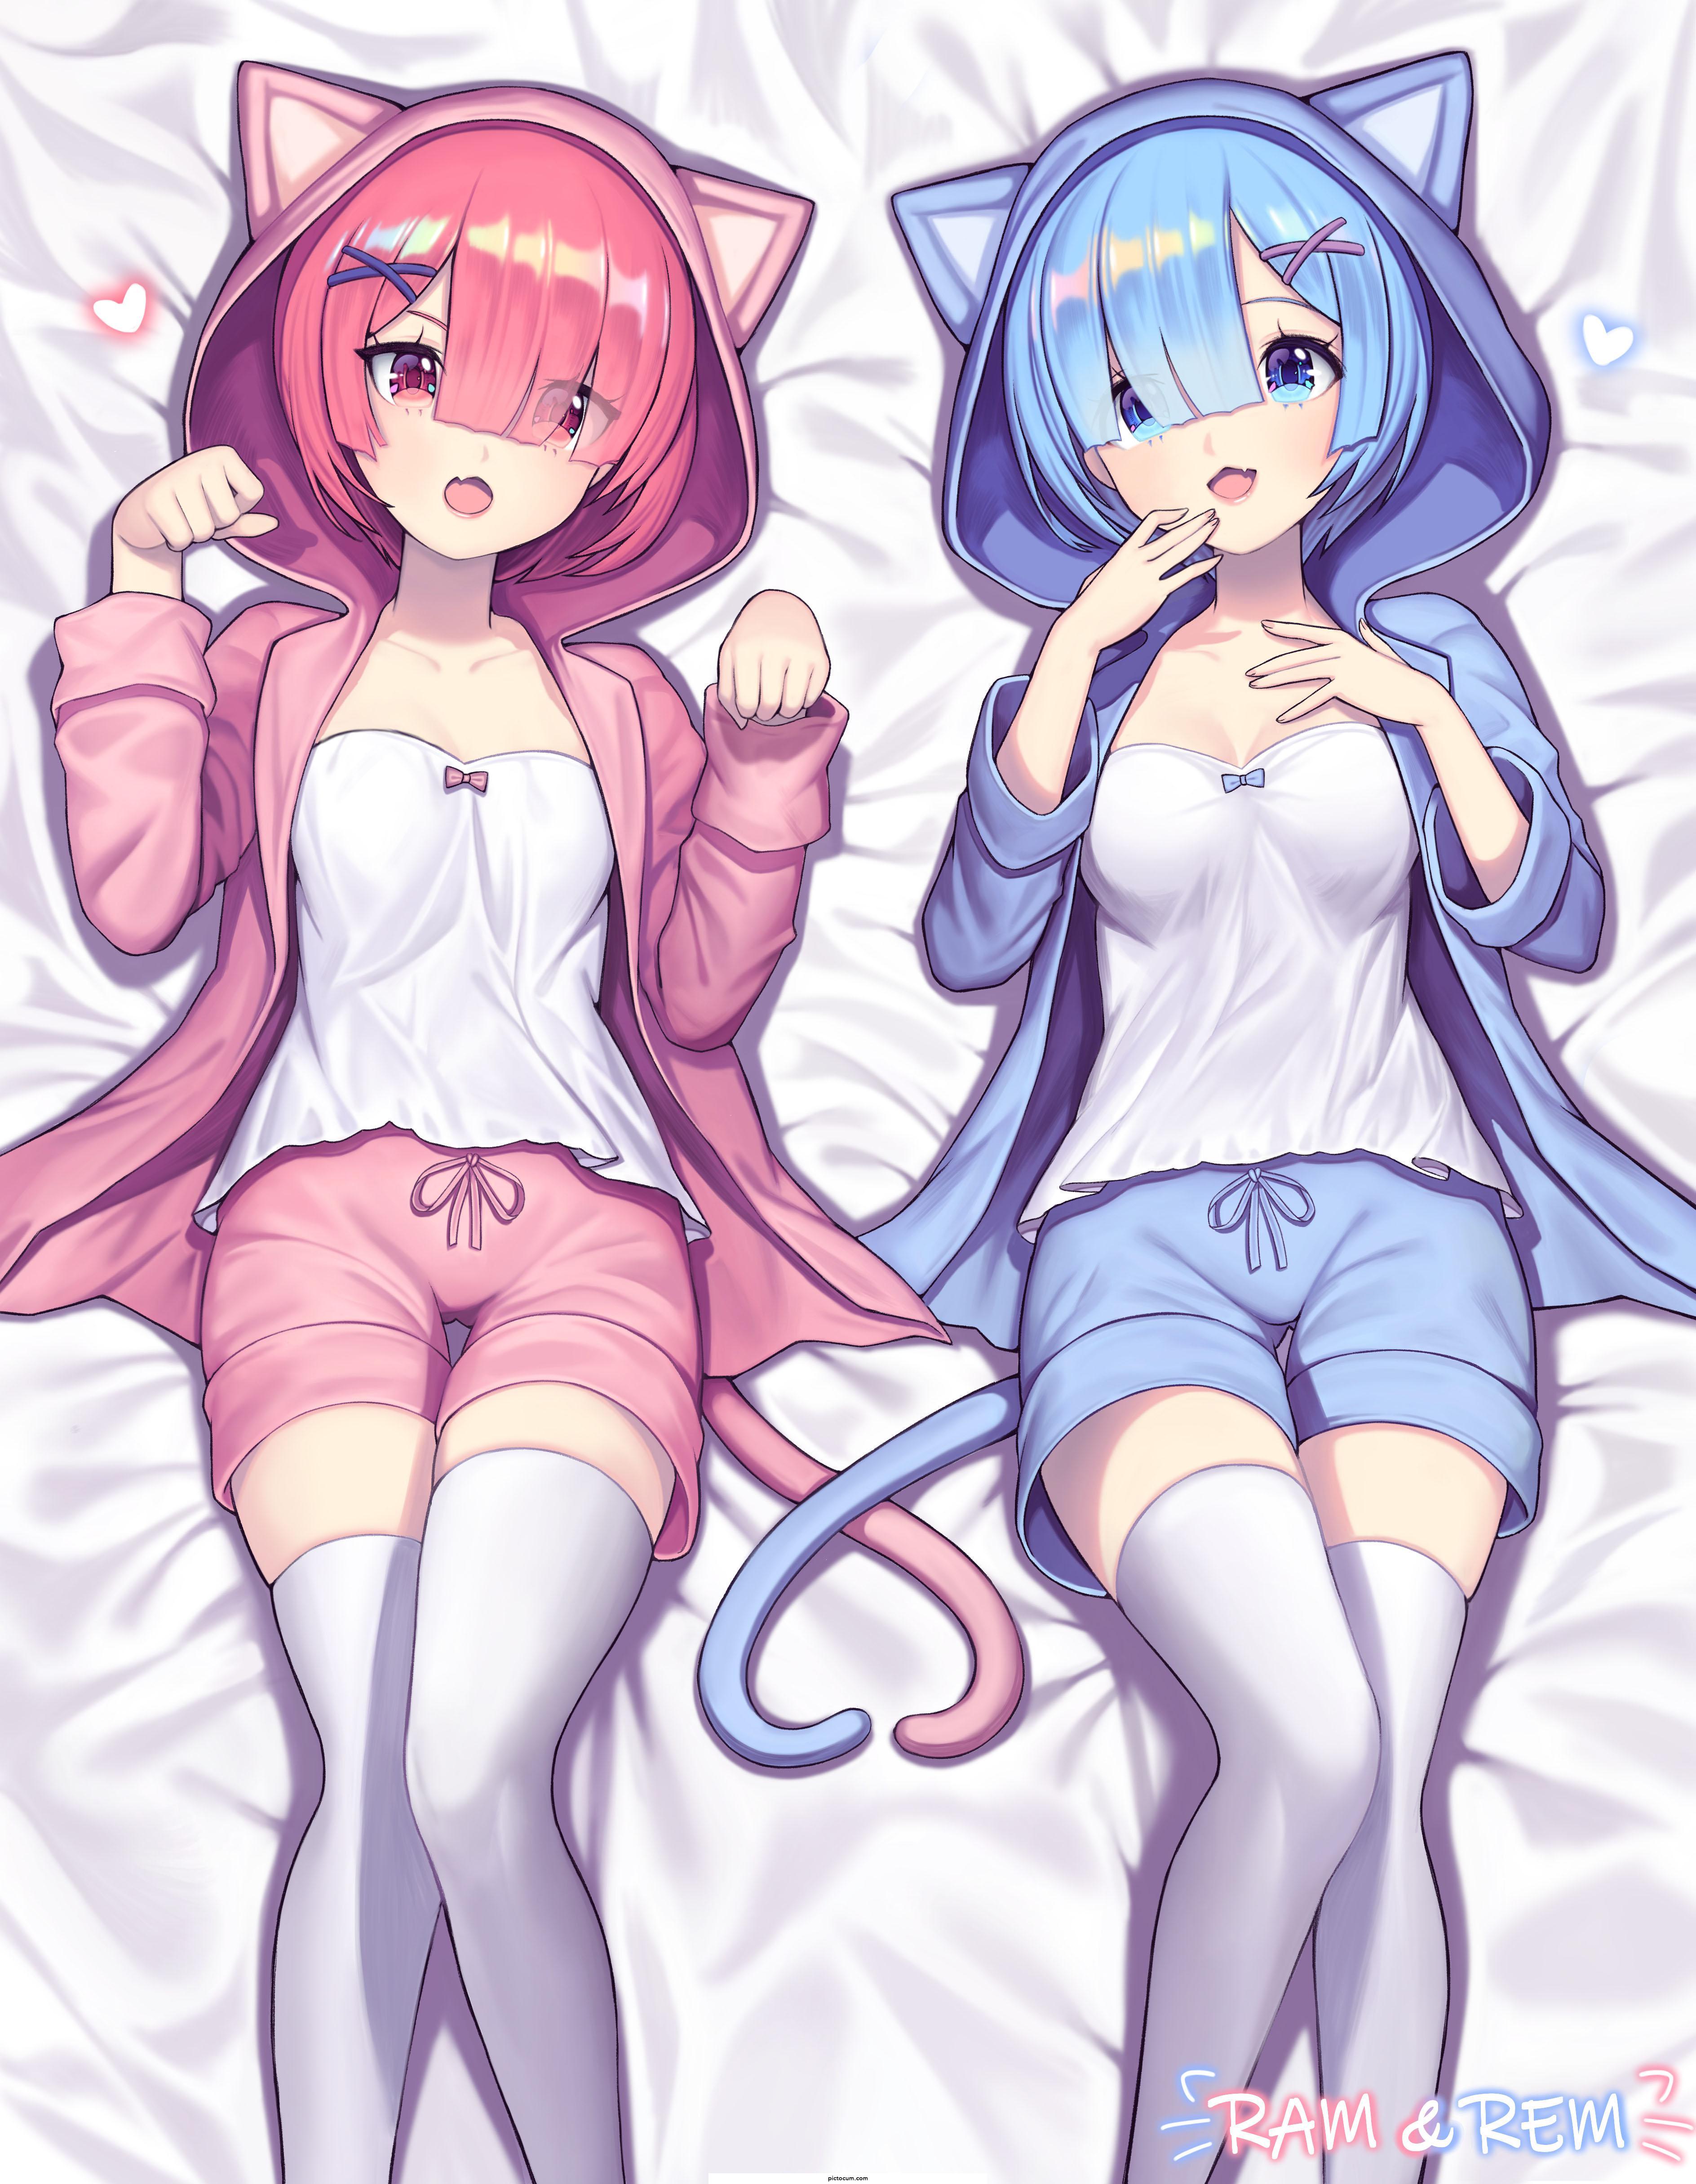 Rem and Ram lying in bed